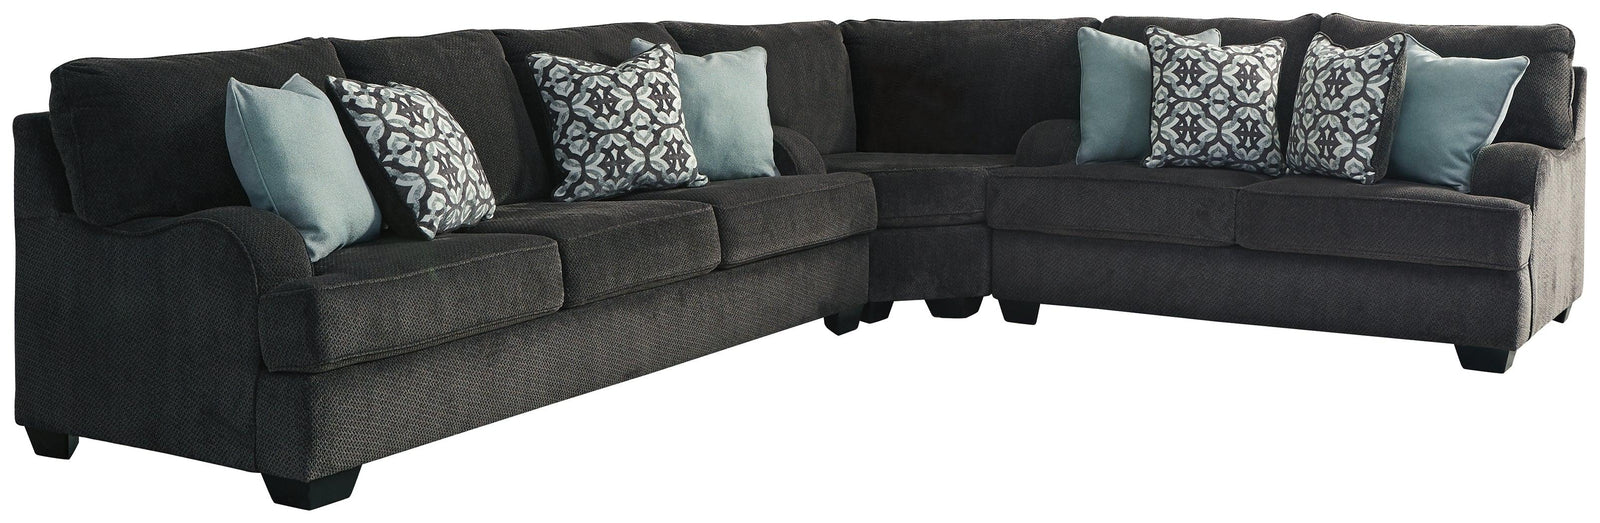 Charenton Charcoal Chenille 3-Piece Sectional